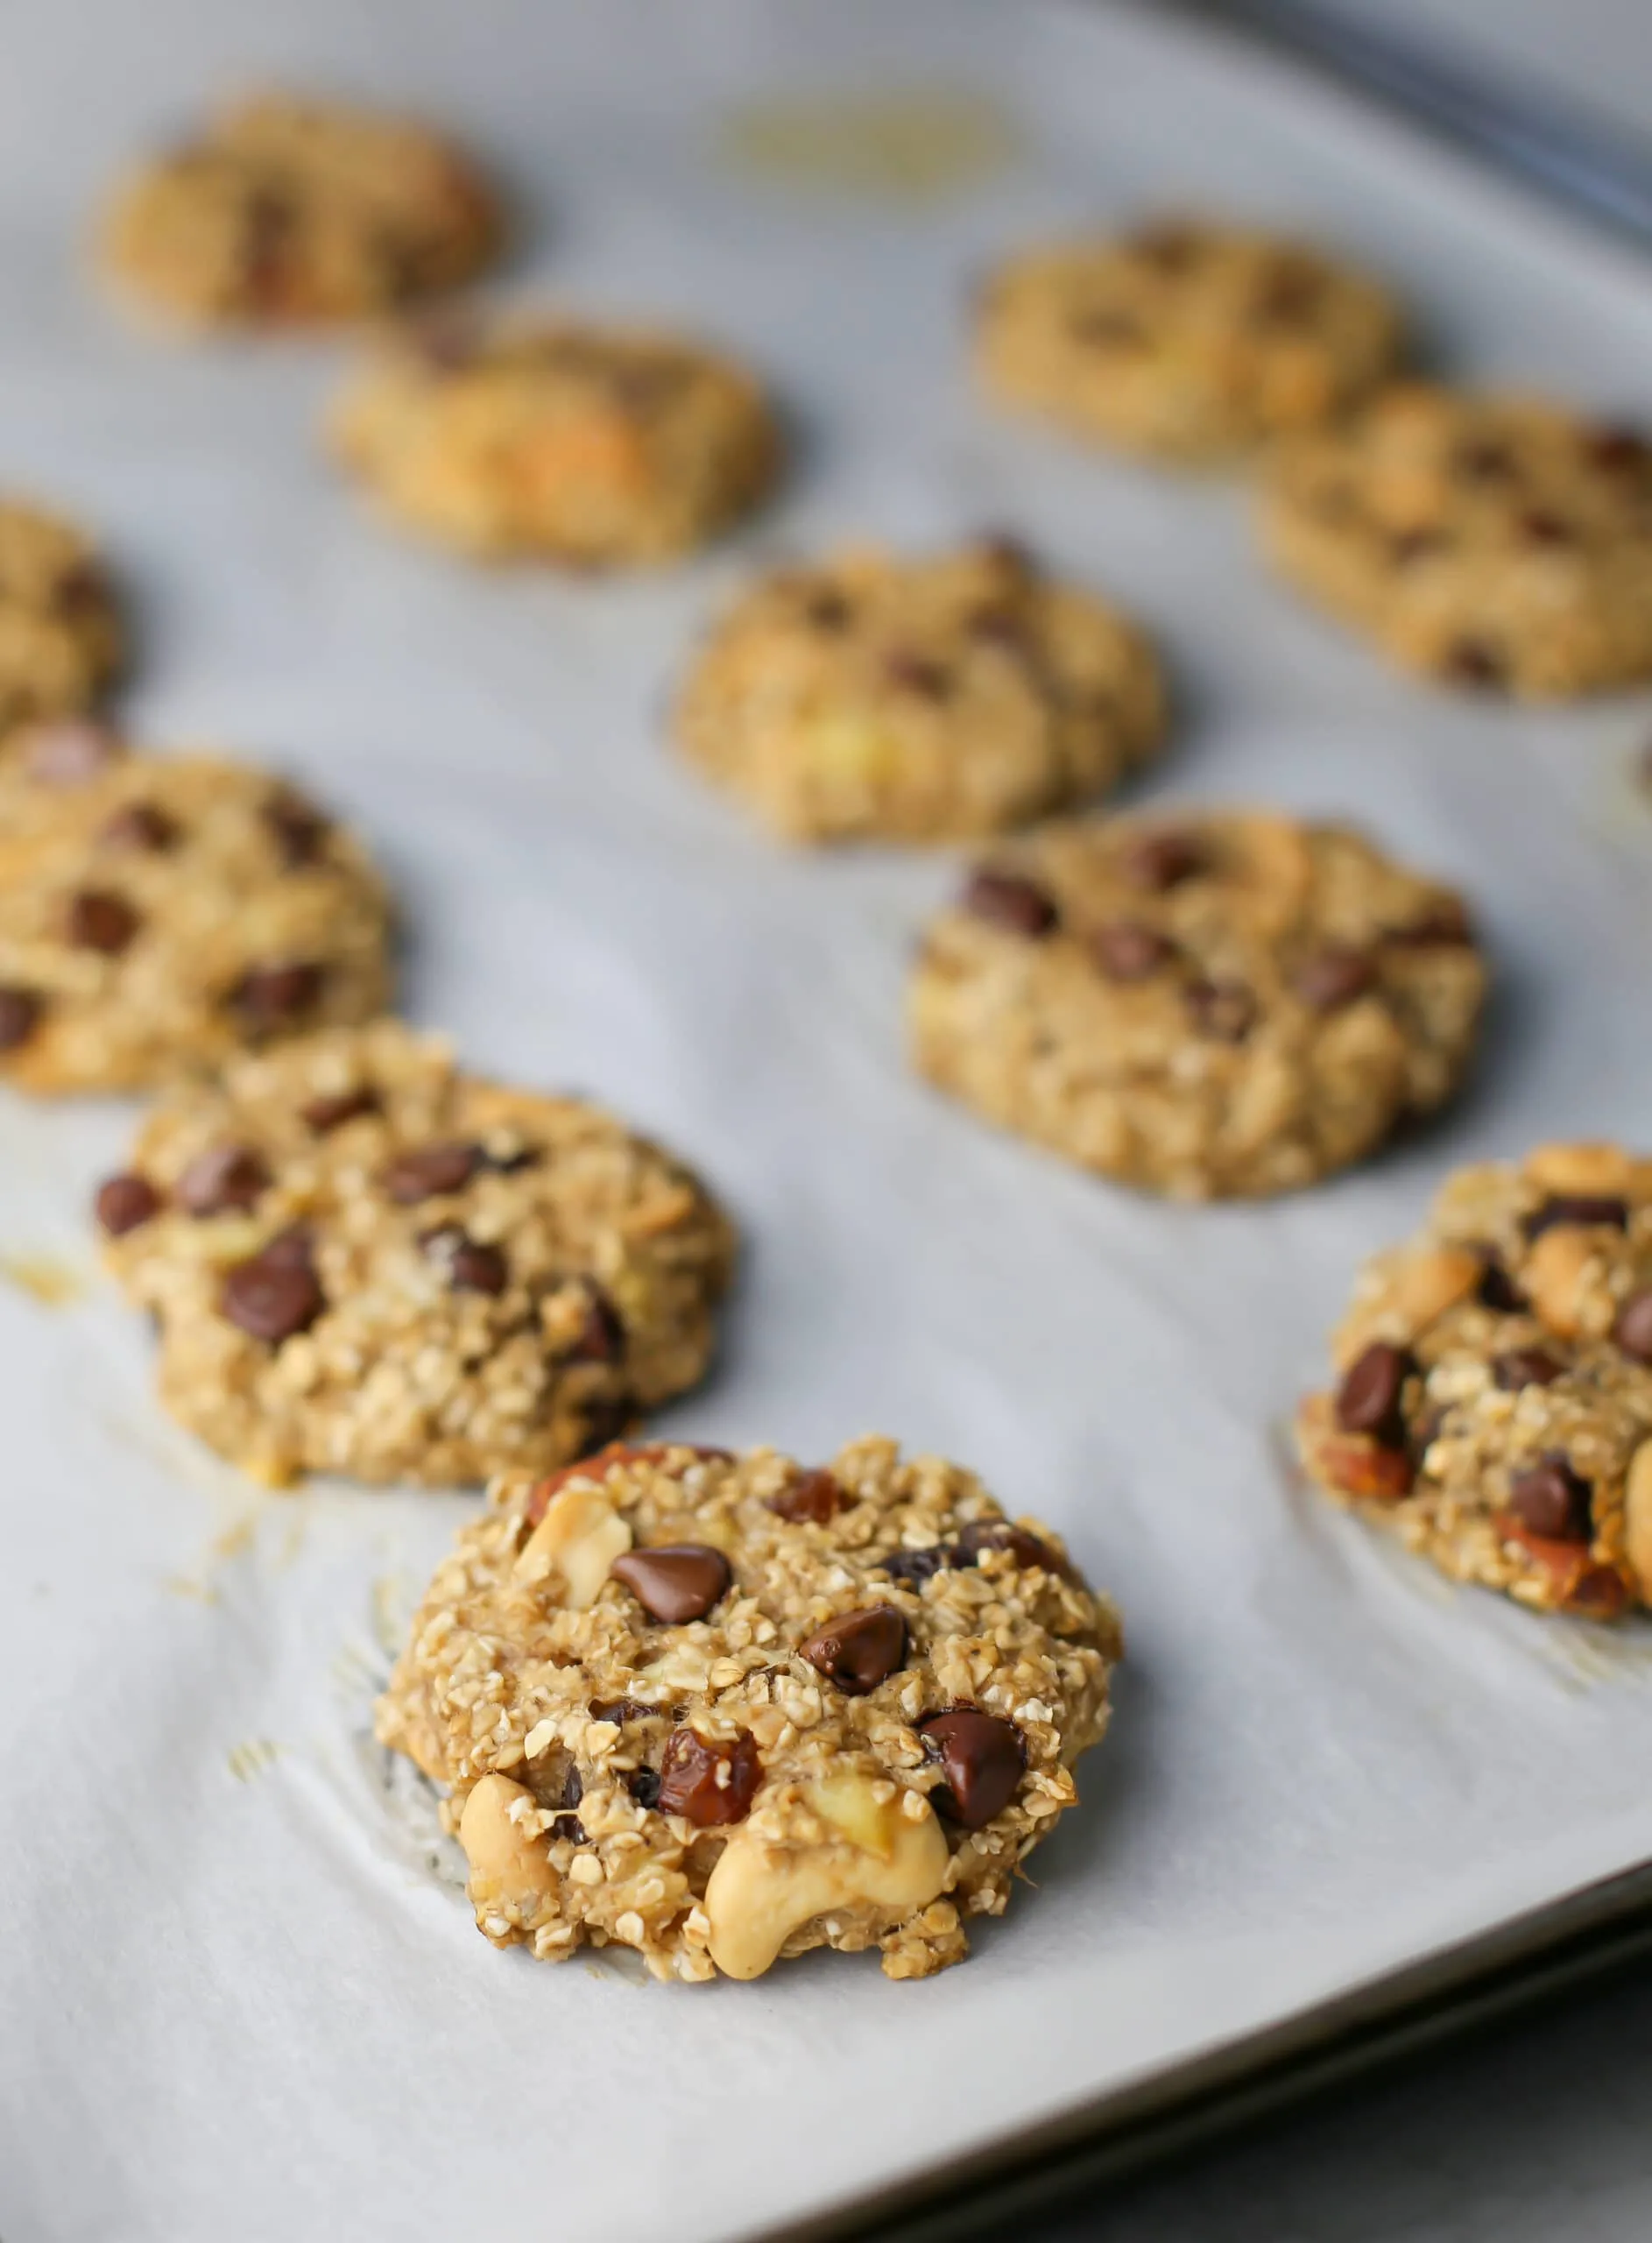 Baked trail mix cookies on a parchment paper lined baking sheet.